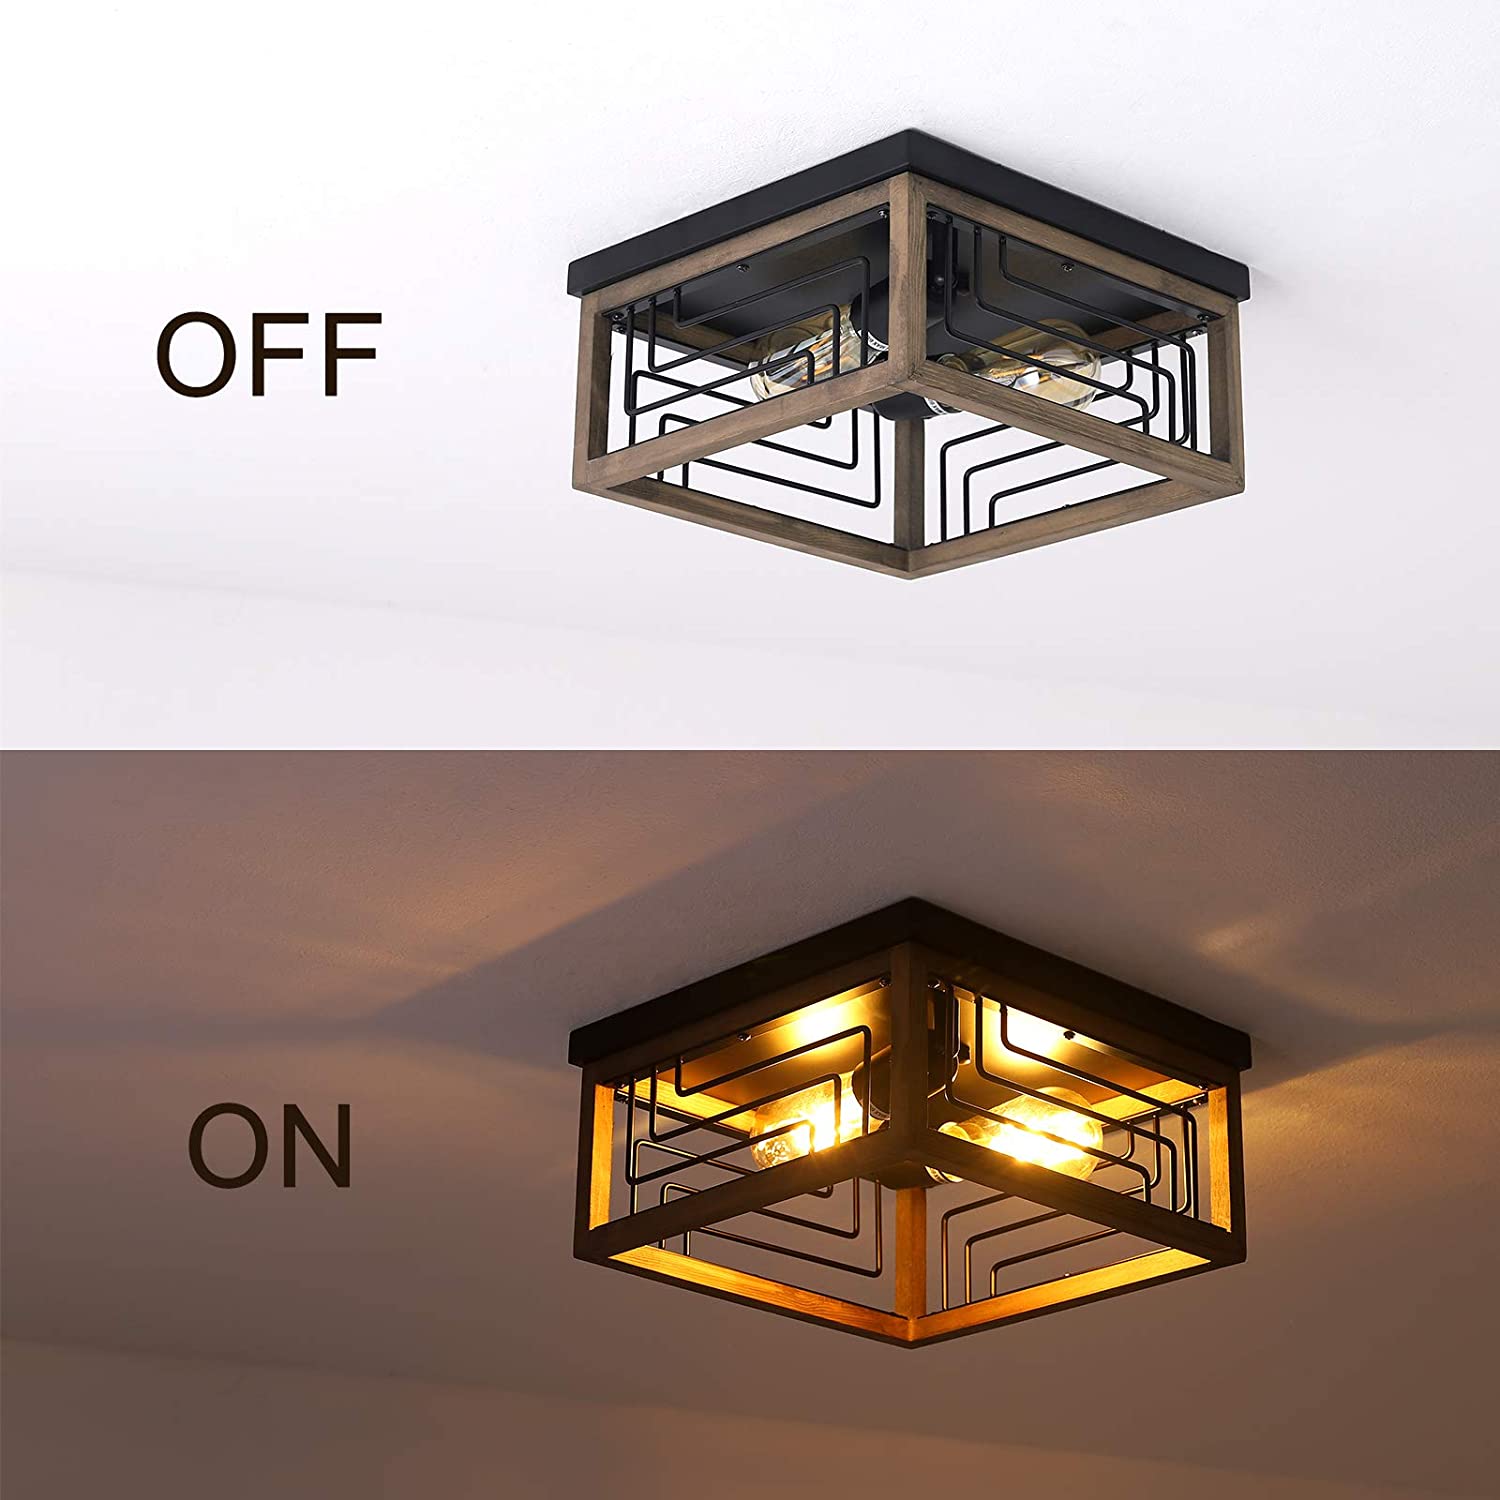 2 light wire cage ceiling light fixture wood square semi flush mount lighting